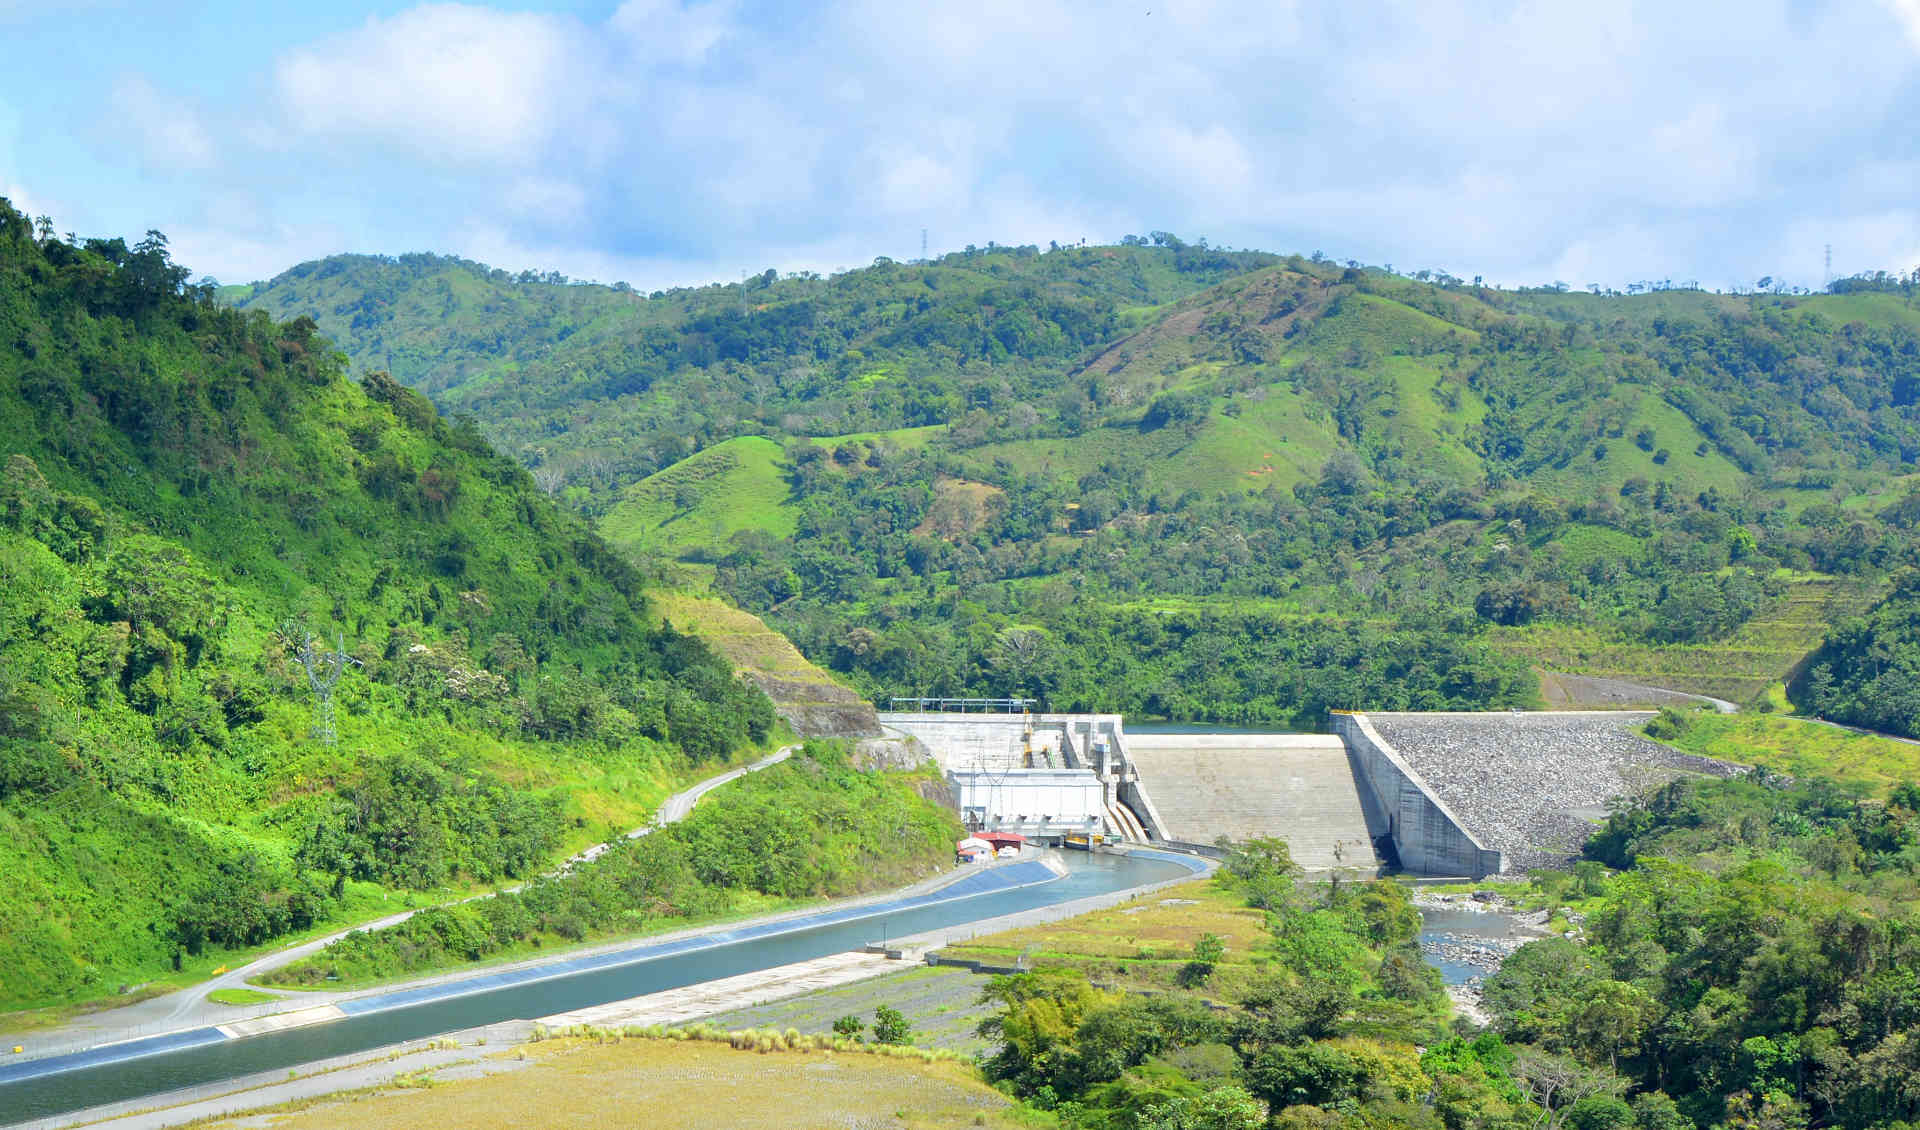 Bajo Frio Dam and canal